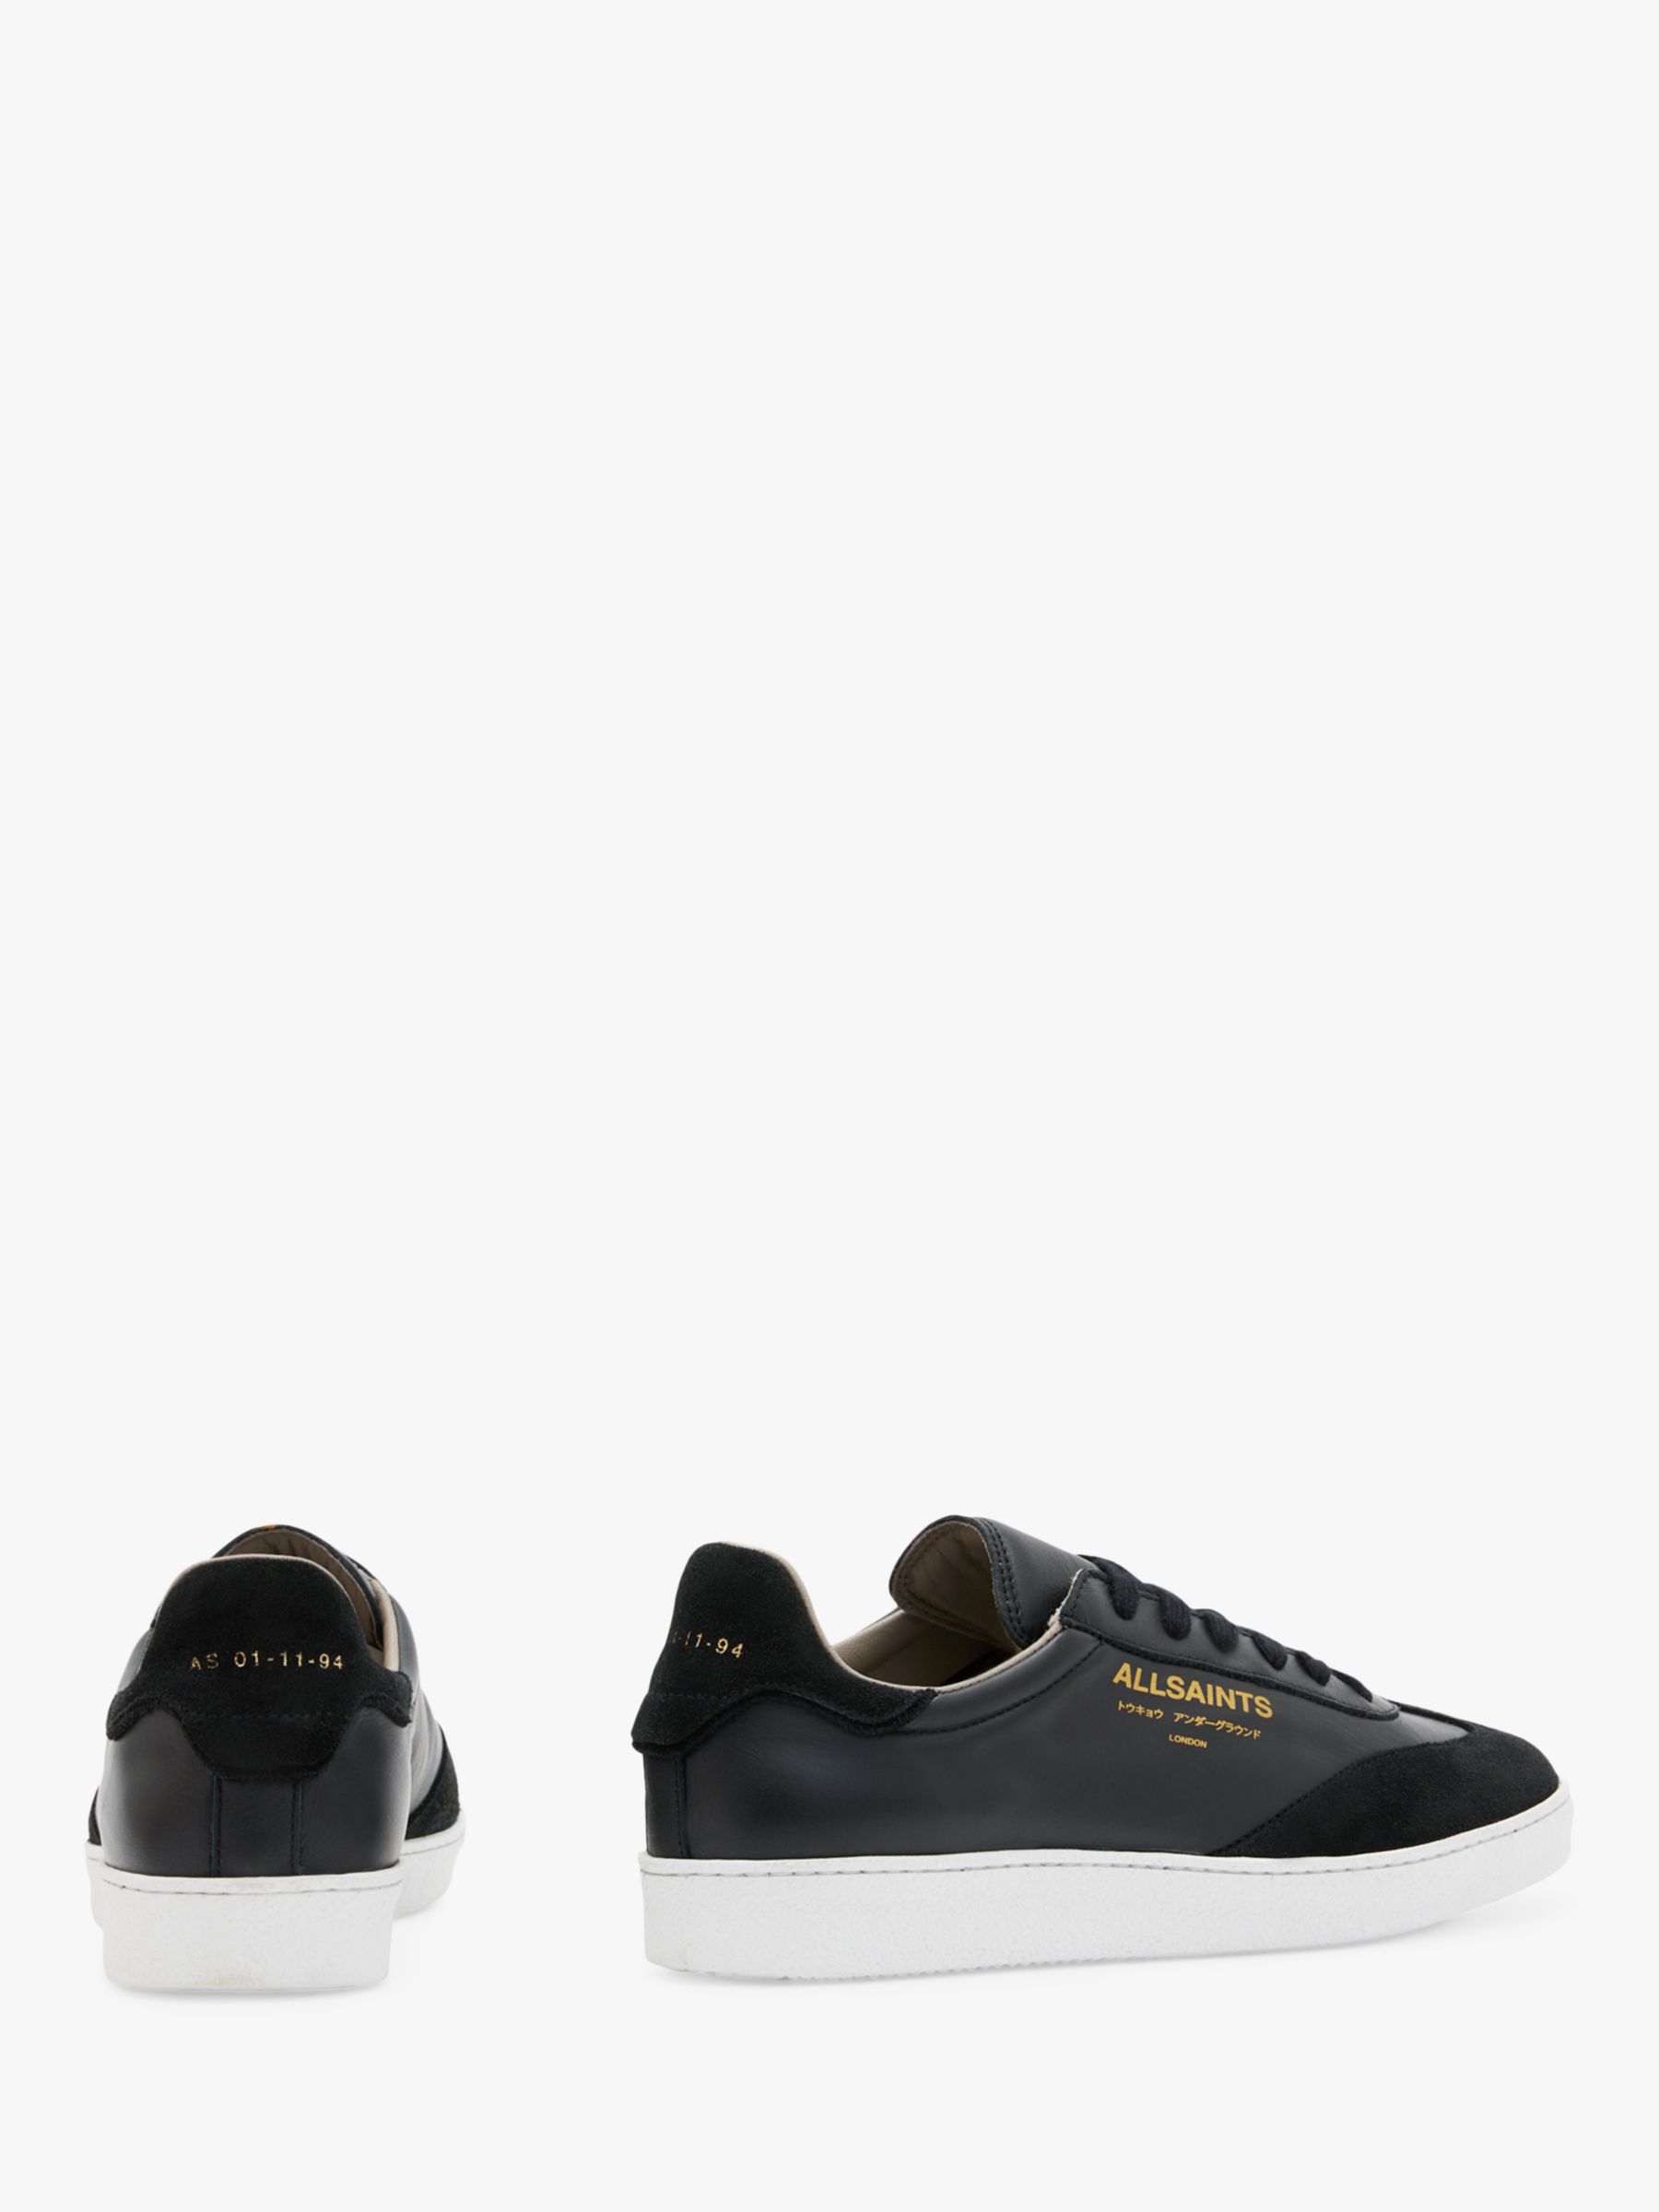 AllSaints Thelma Leather Trainers, Black, 3